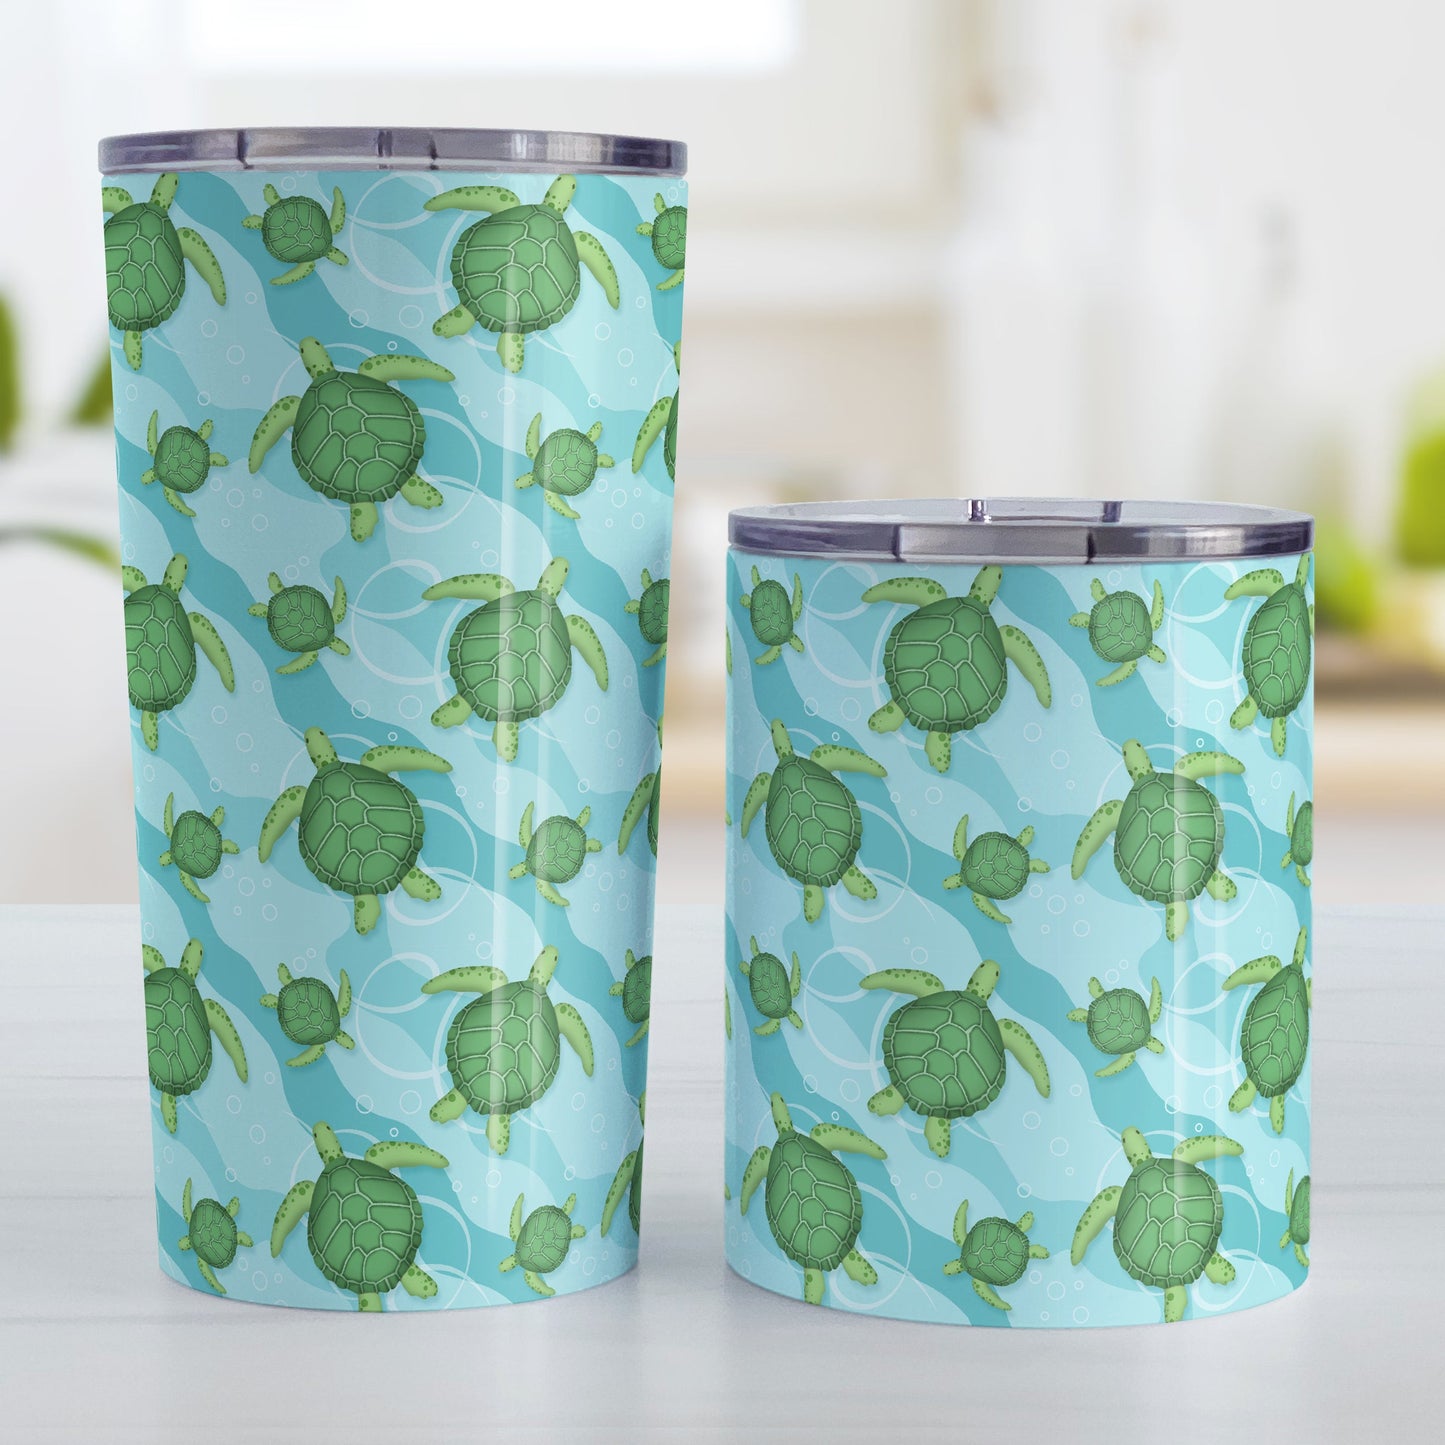 Aquatic Sea Turtle Pattern Tumbler Cup (20oz and 10oz, stainless steel insulated) at Amy's Coffee Mugs. Sea turtle tumbler cups with an aquatic pattern of green sea turtles, swimming over a wavy underwater pattern design in blue and turquoise, that wraps around the cups. The photo shows both sized cups next to each other.